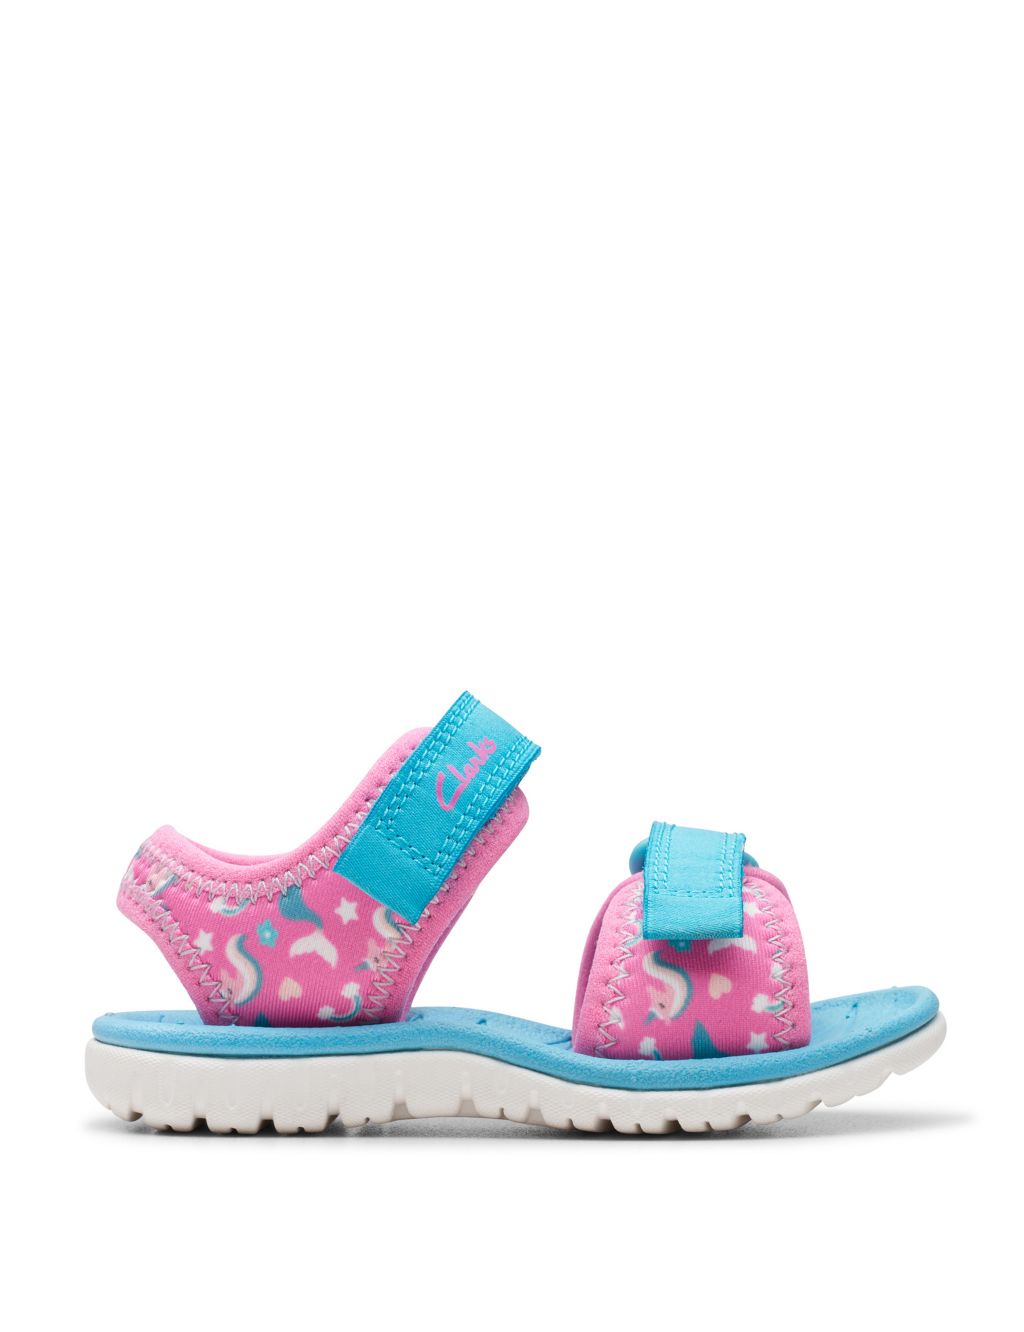 Kids' Patterned Riptape Sandals (4 Small - 6.5 Small)